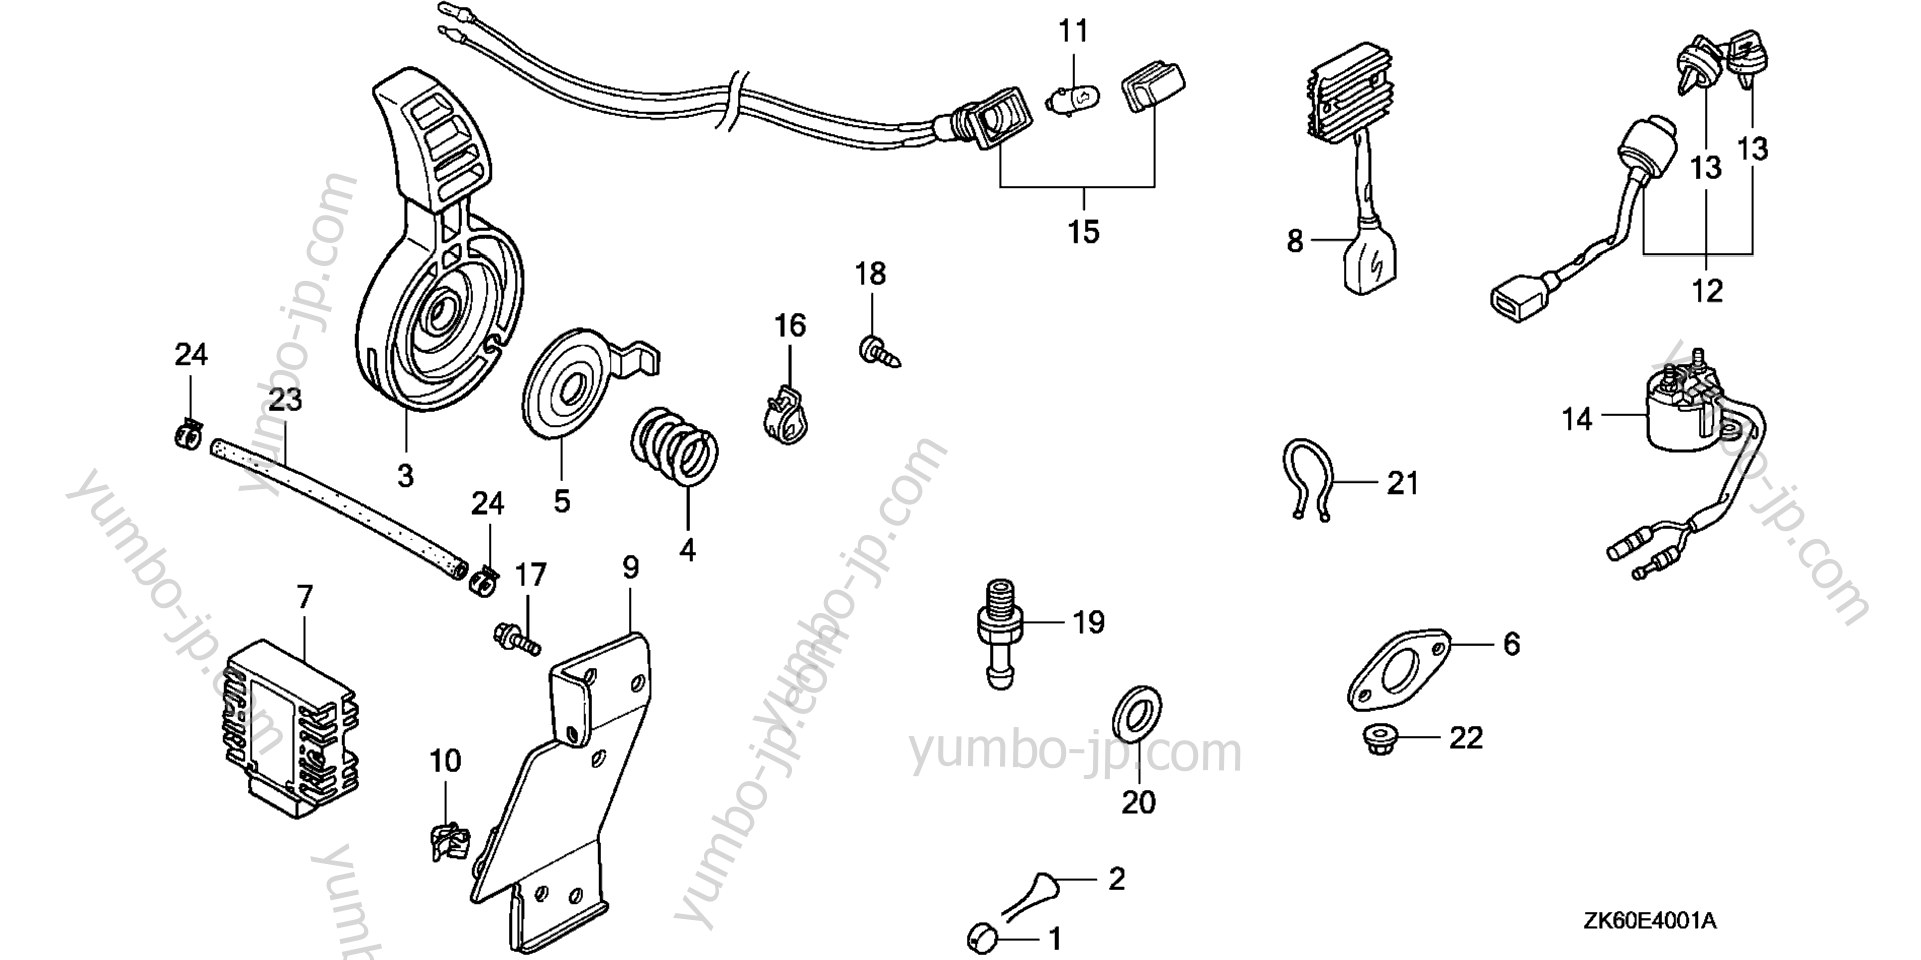 OTHER PARTS (THROTTLE LEVER) for multi purpose engines HONDA GX390K1 VXP7 